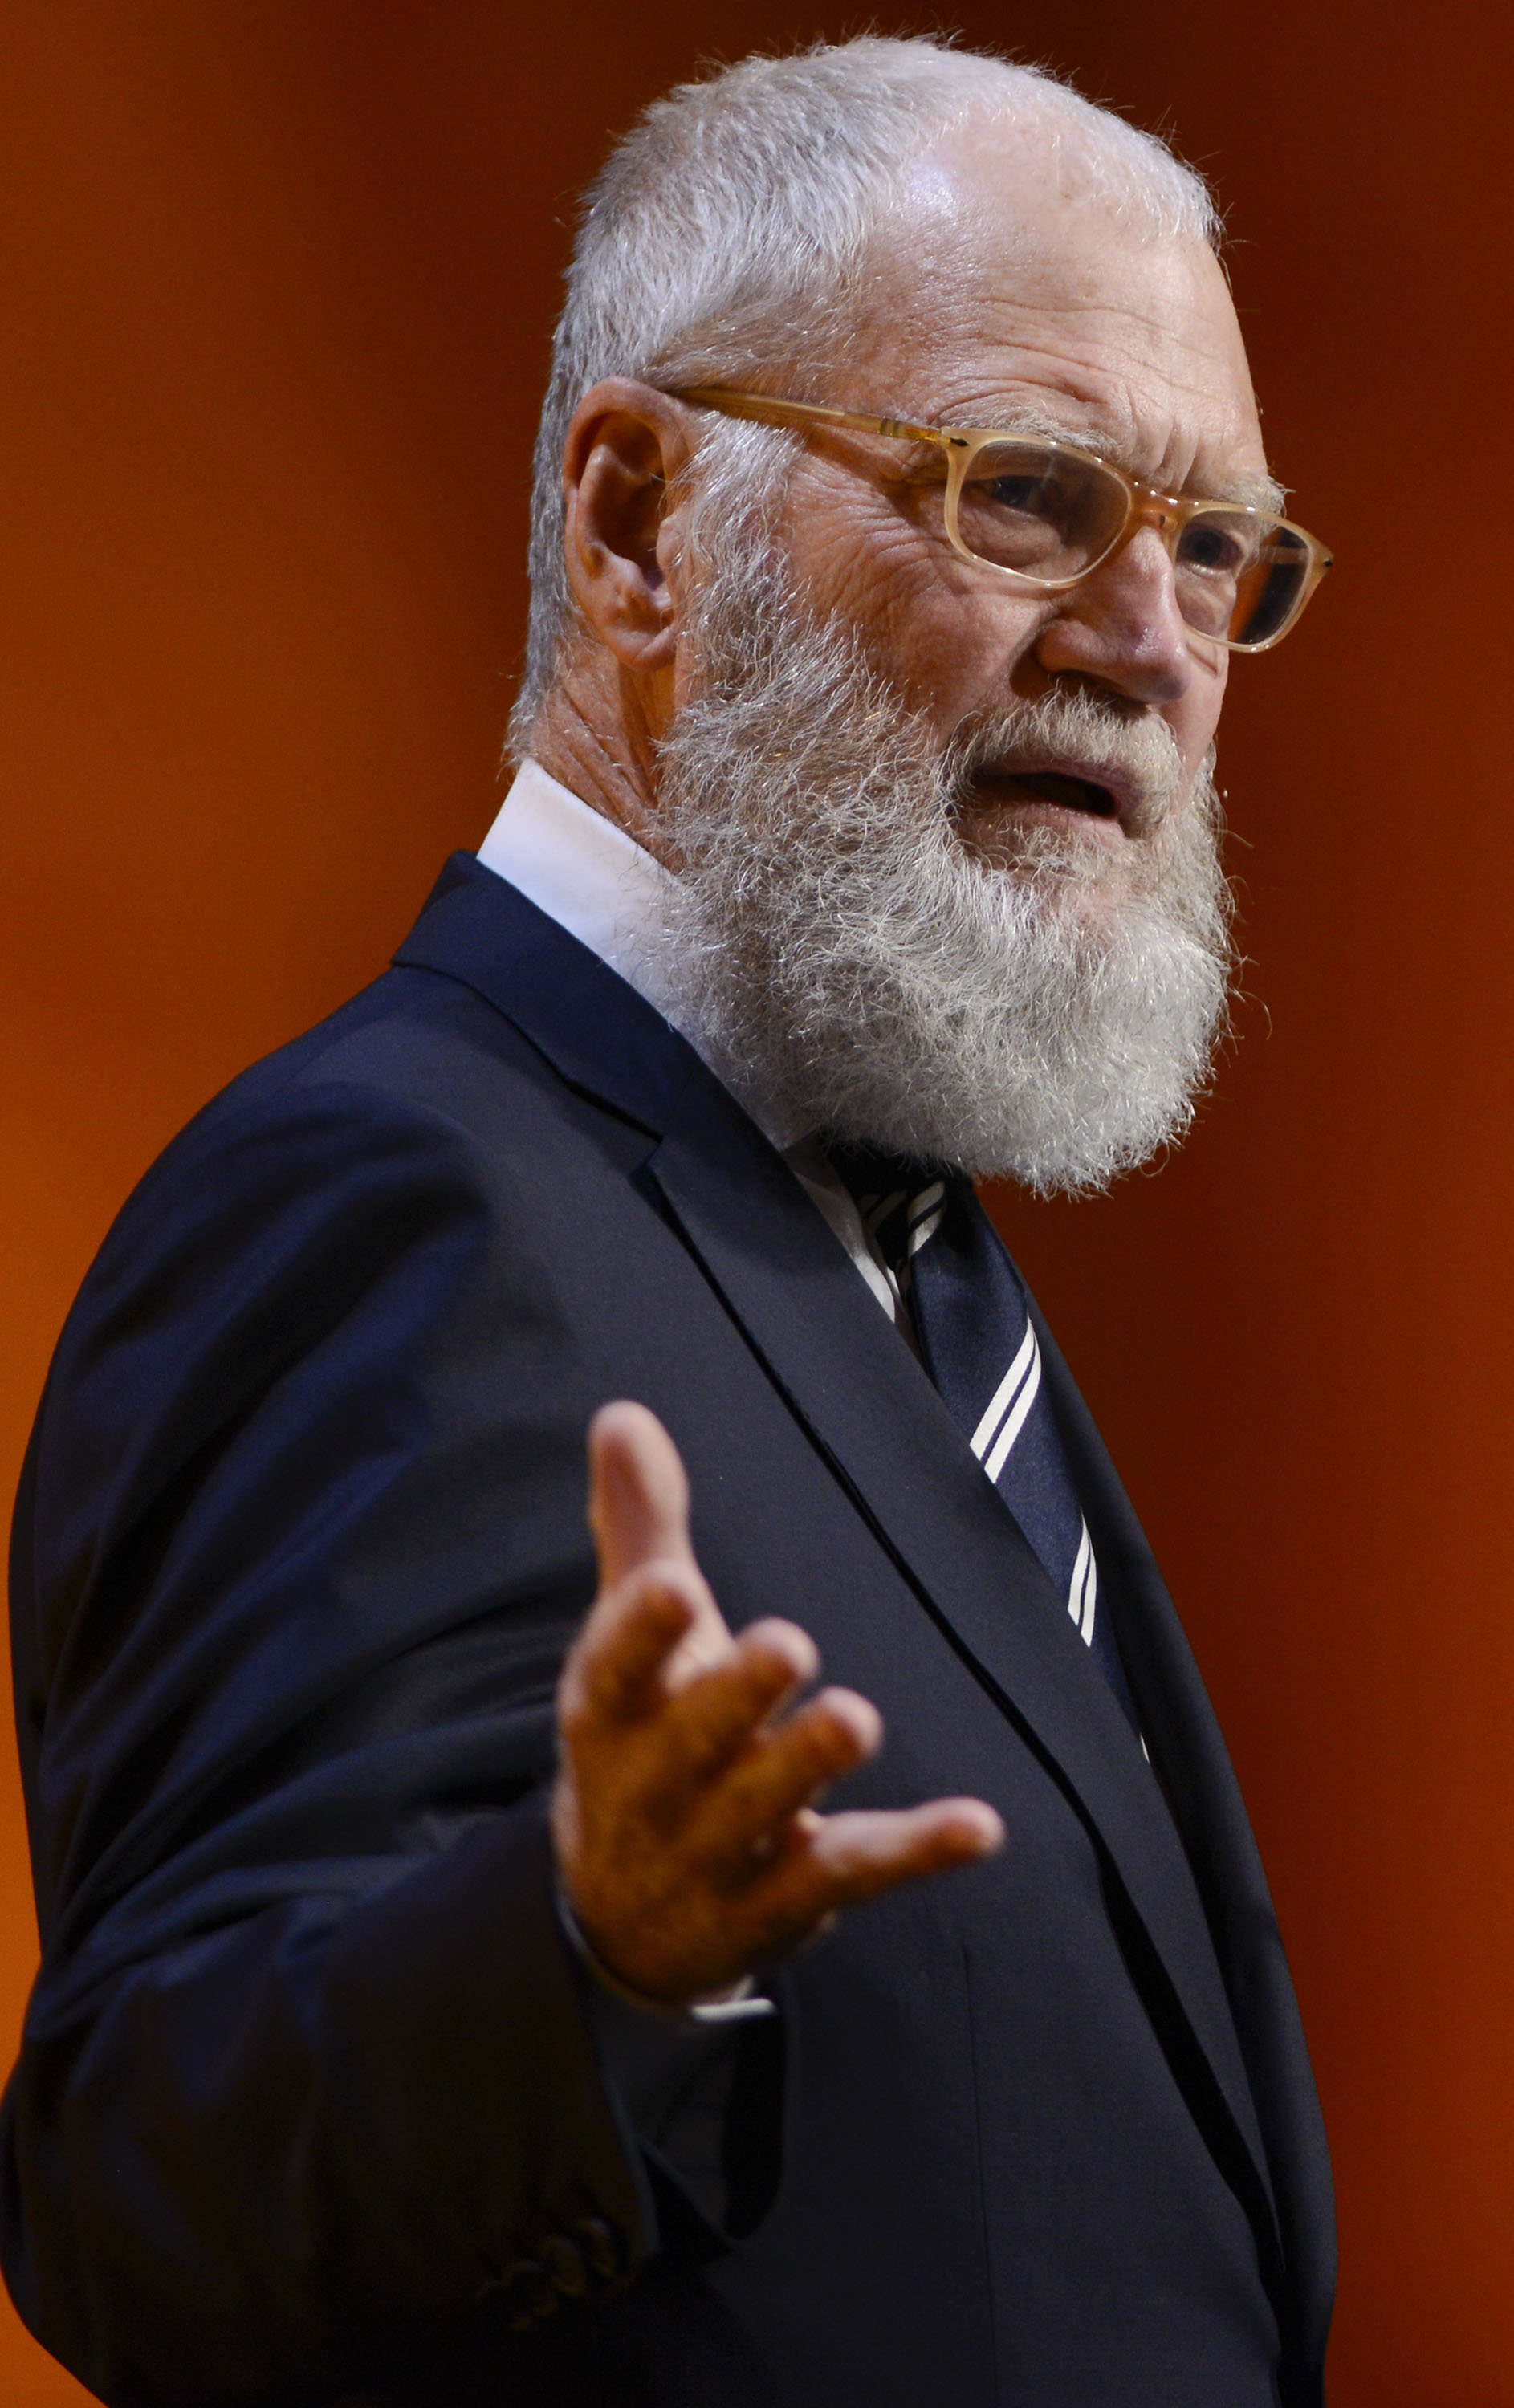 David Letterman speaks at the 32nd Anniversary Gala Fundraiser at National Building Museum on November 17, 2016, in Washington, DC. | Getty Images.